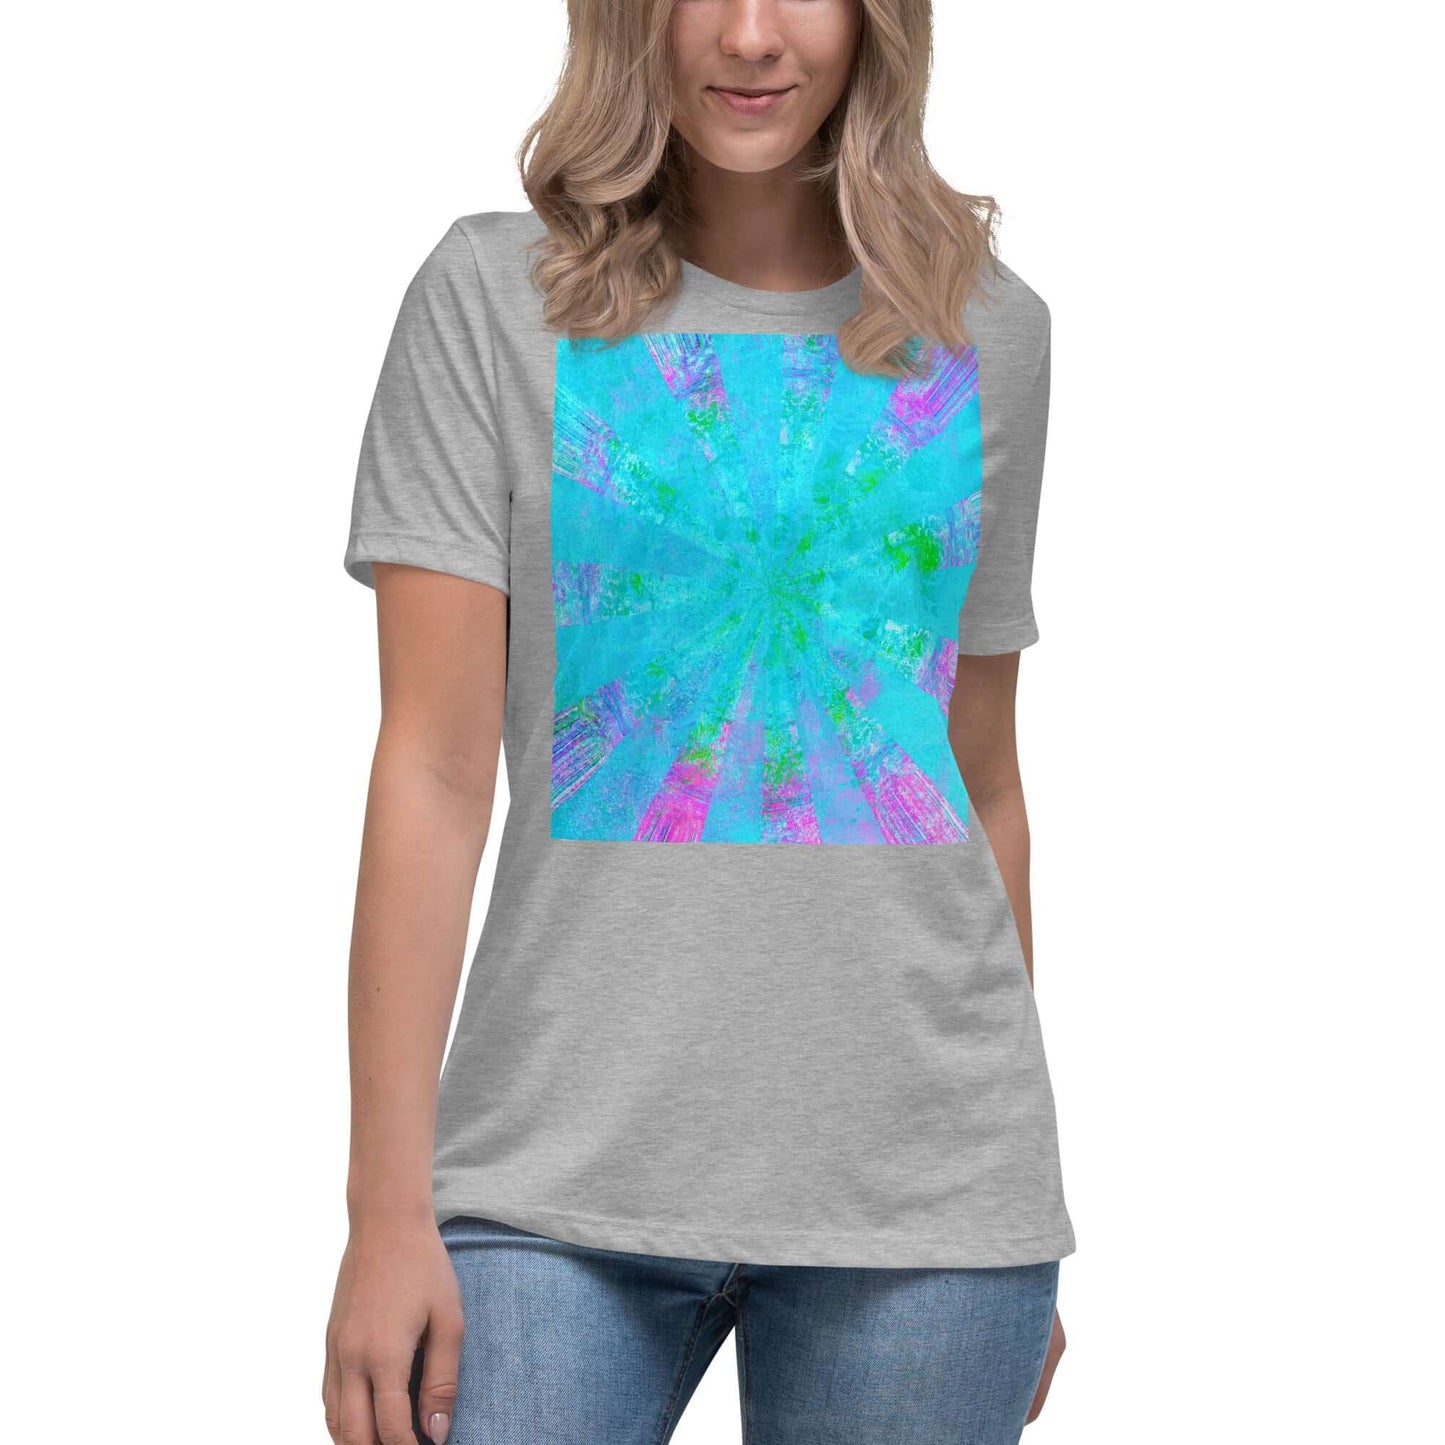 Turquoise Blue with Purple Radial Abstract Art “Blue Stingray” Women’s Short Sleeve Tee in Athletic Heather Gray